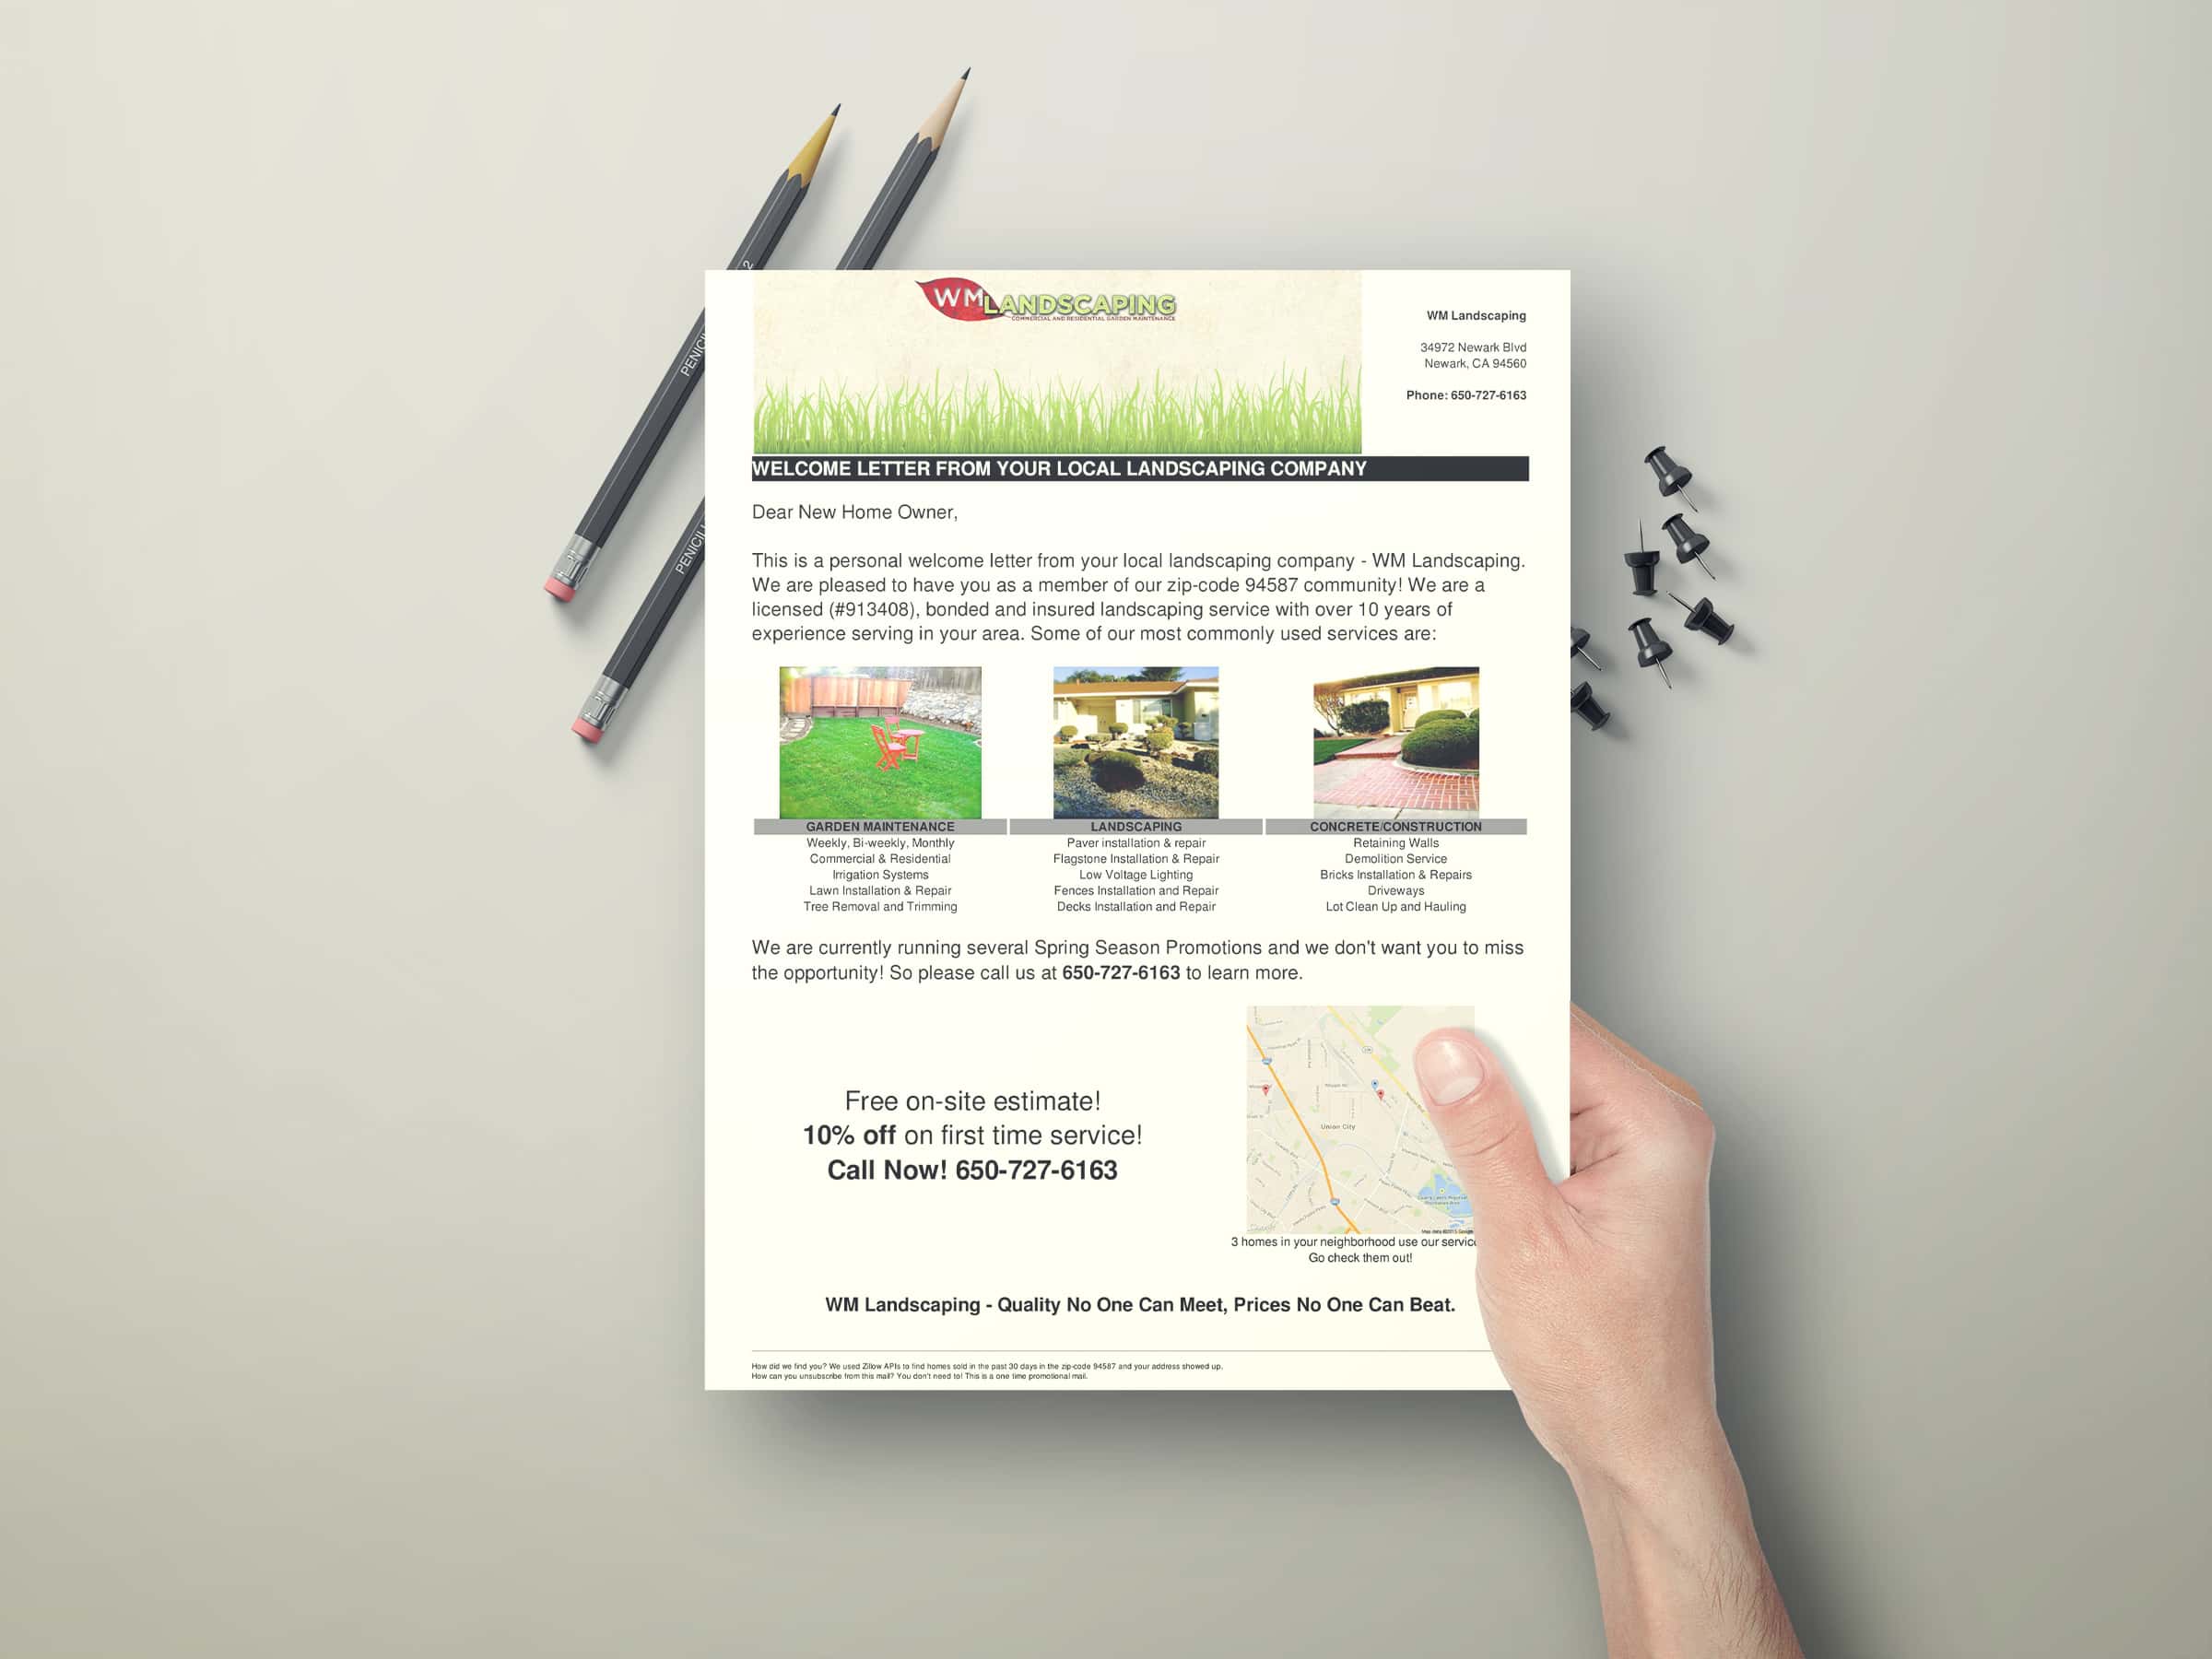 Highly Personalized Direct Mail for WM Landscaping